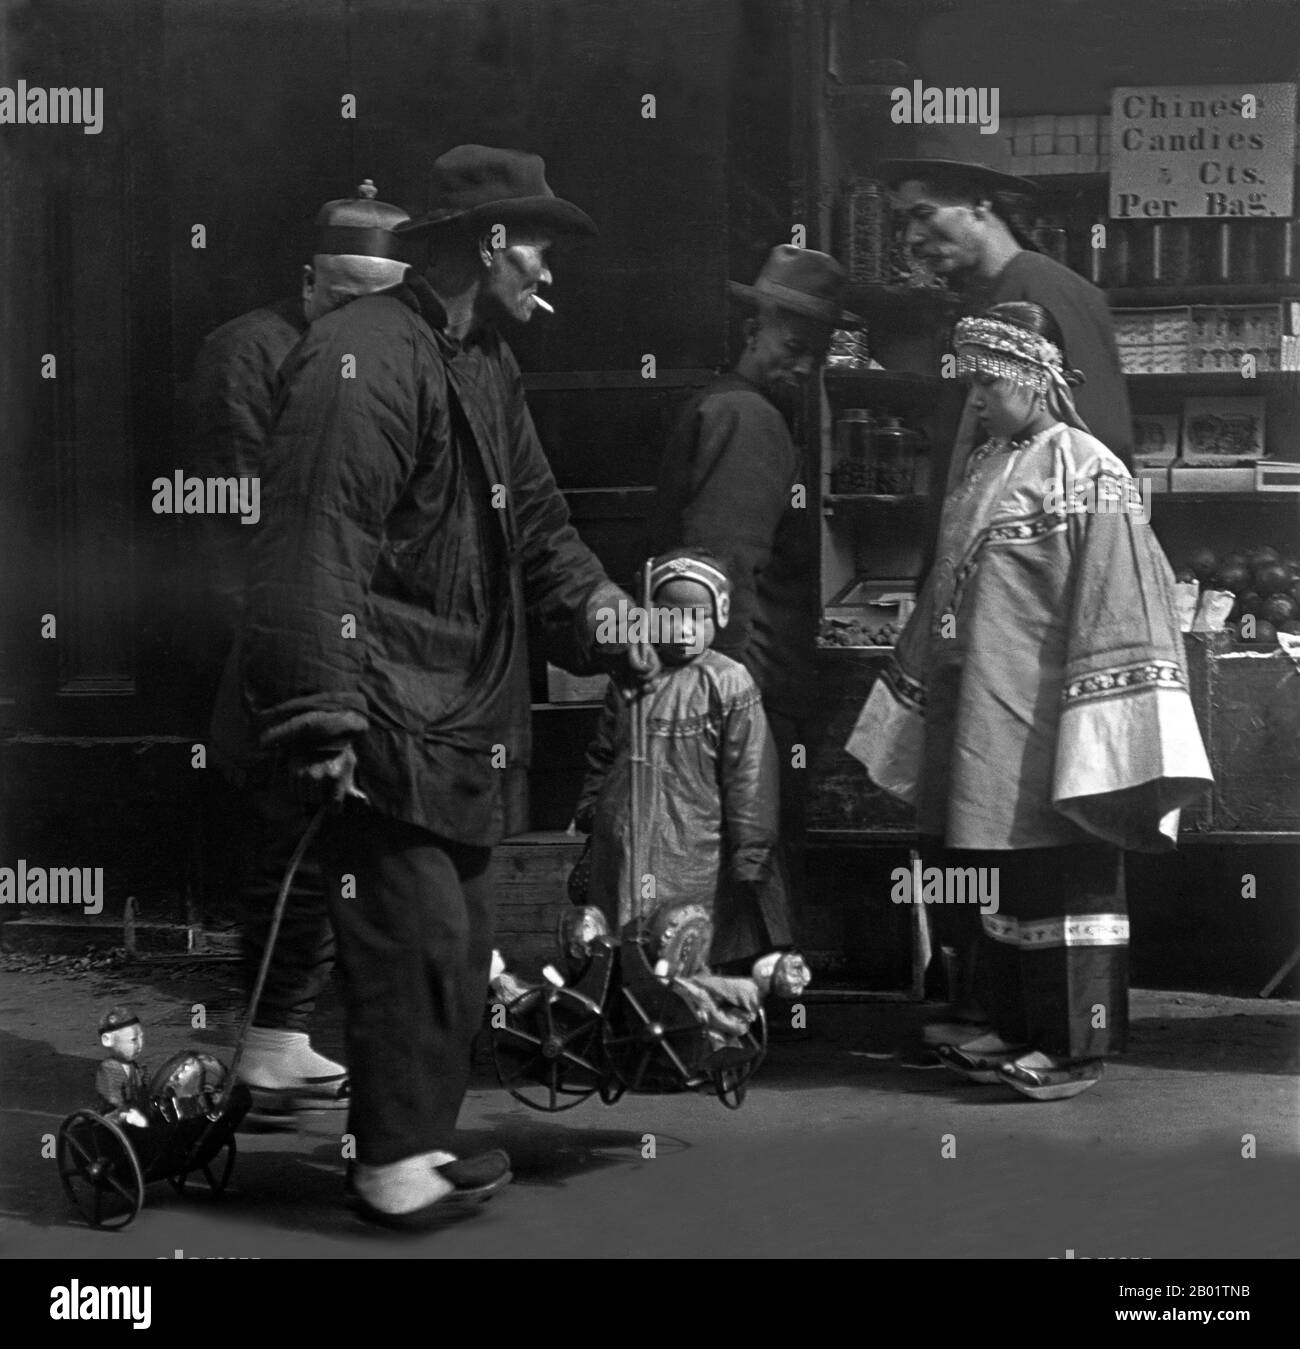 USA: Itinerant toy seller, San Francisco Chinatown. Photo by Arnold Genthe (1869-1942), c. 1900.  San Francisco's Chinatown was the port of entry for early Hoisanese and Zhongshanese Chinese immigrants from the Guangdong province of southern China from the 1850s to the 1900s. The area was the one geographical region deeded by the city government and private property owners which allowed Chinese persons to inherit and inhabit dwellings within the city.  The majority of these Chinese shopkeepers, restaurant owners and hired workers in San Francisco were predominantly Hoisanese and male. Stock Photo